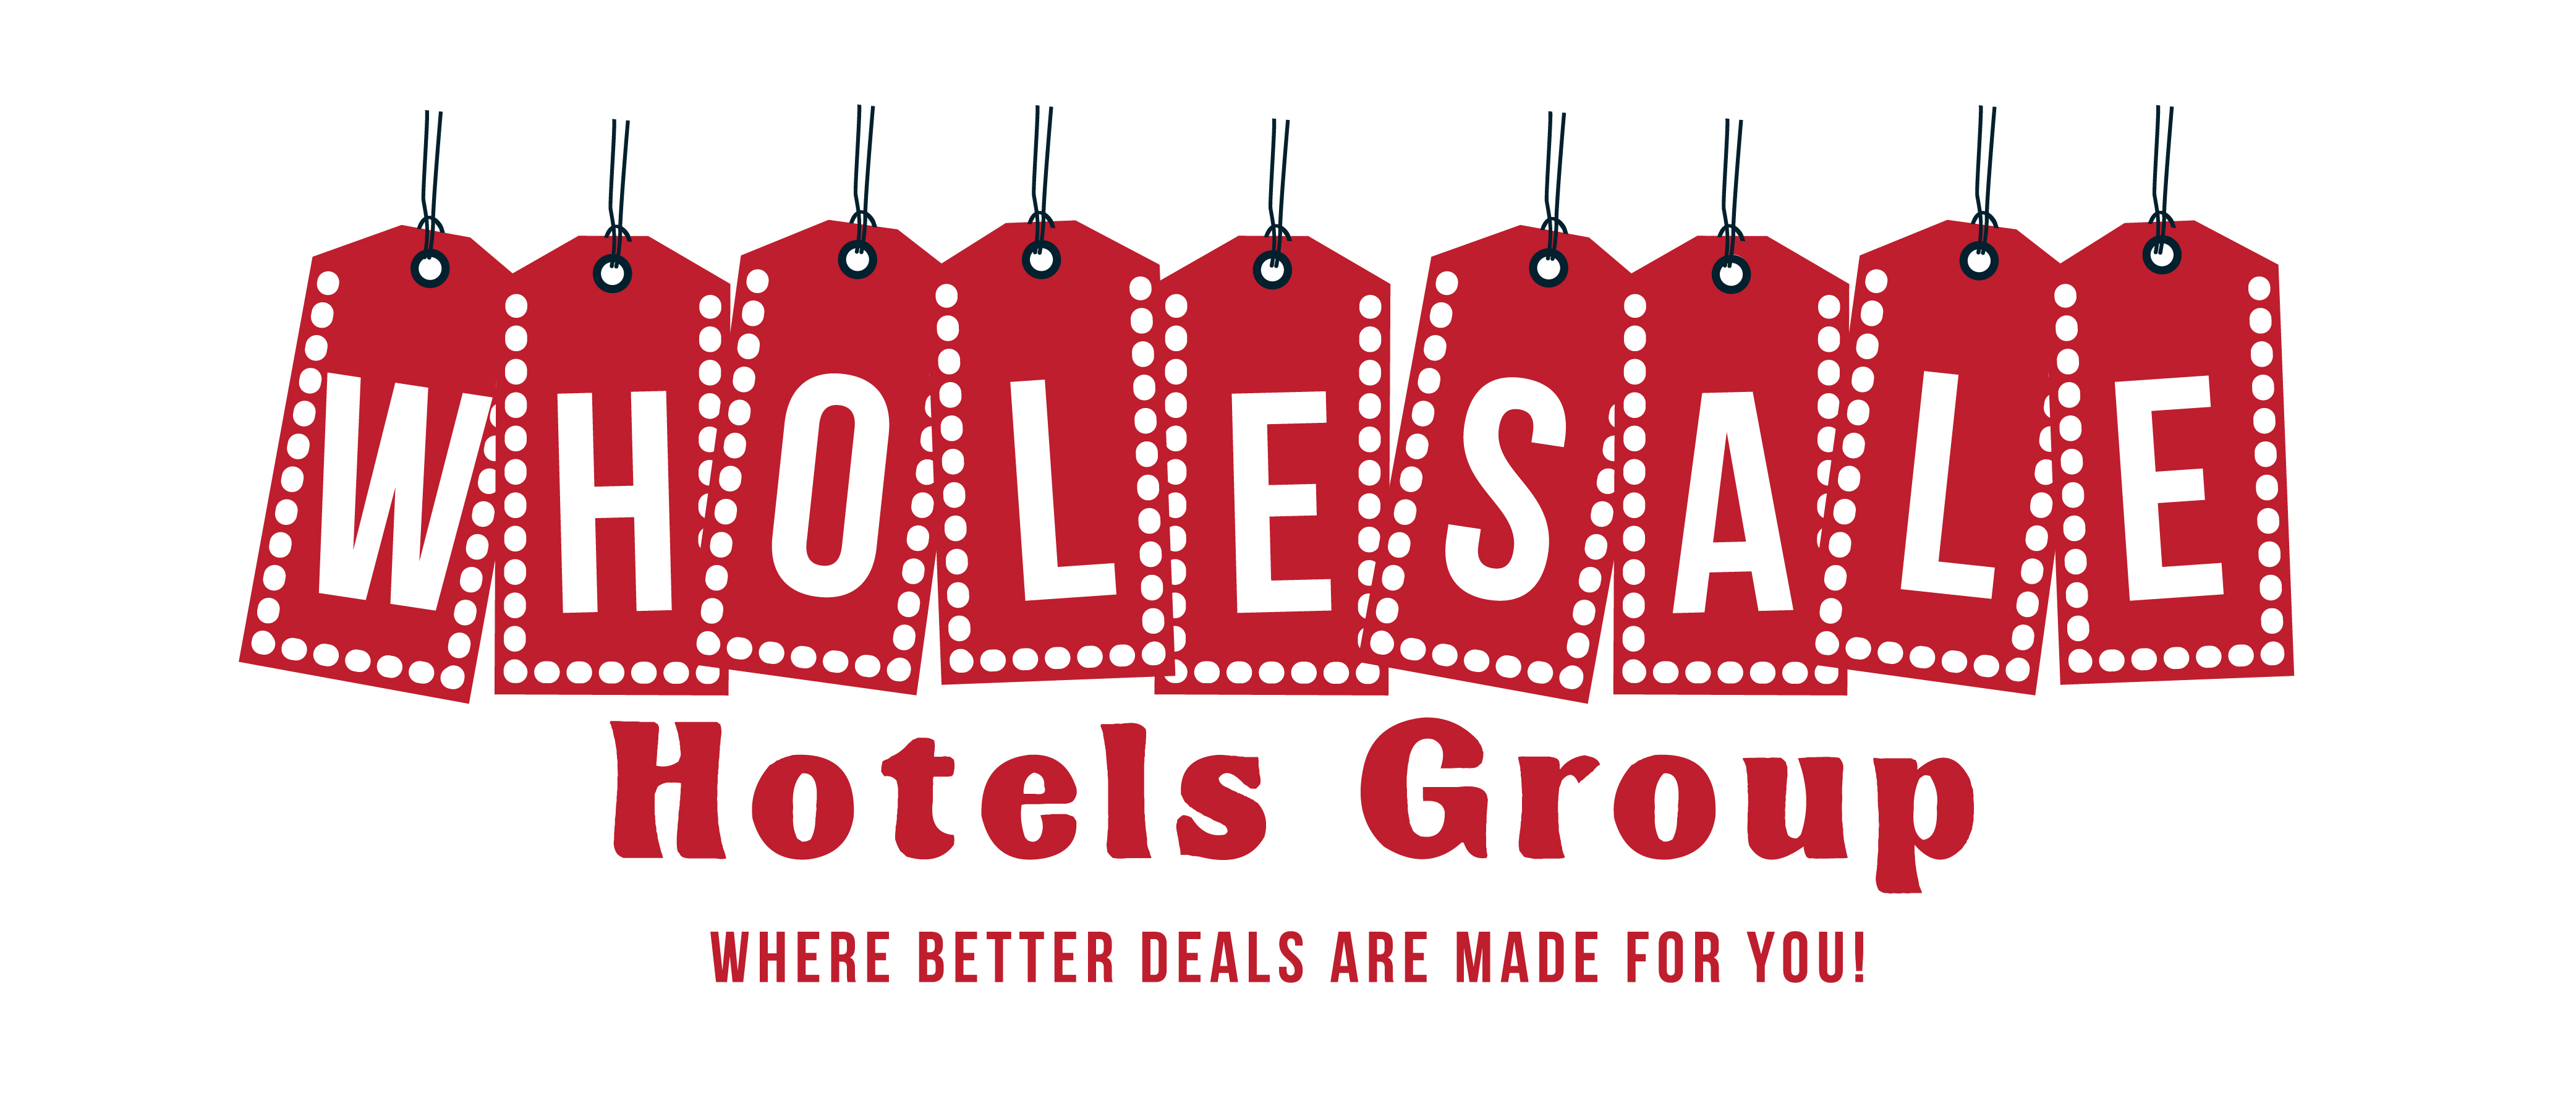 Wholesale Hotels Group - Your go-to place for wholesale travel deals!